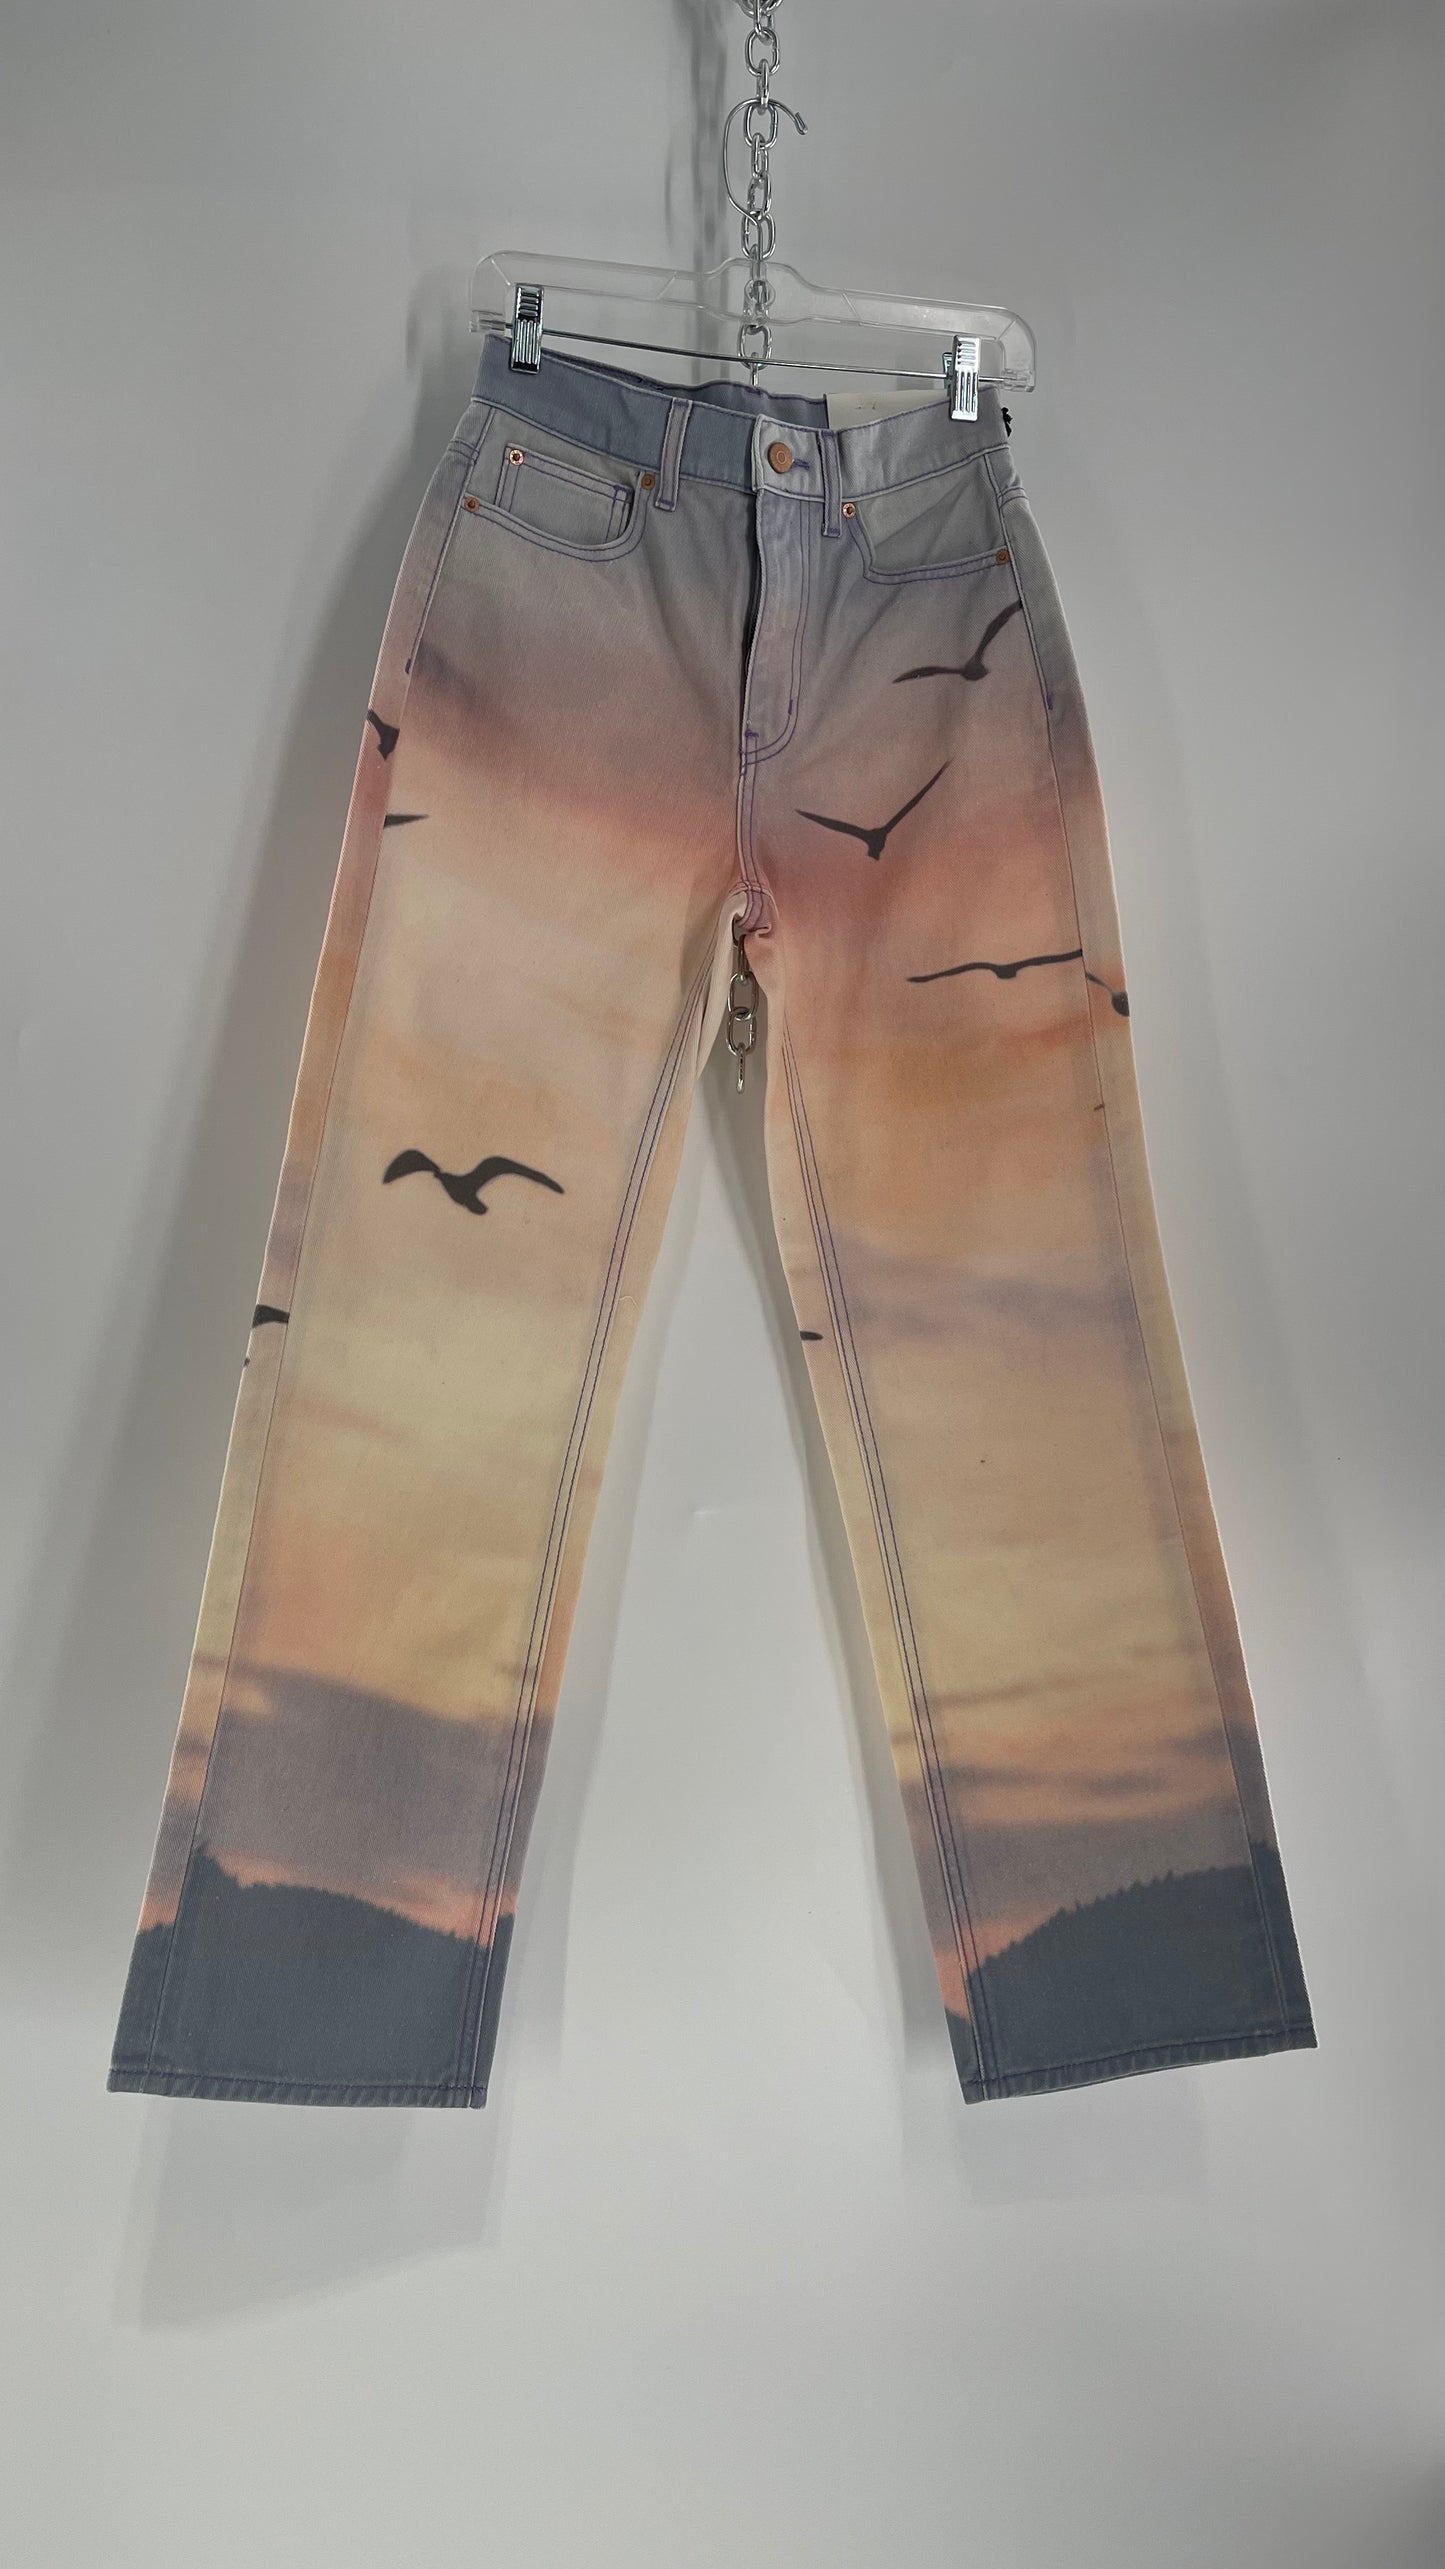 BDG Urban Outfitters Lilac Pink Horizon Line, Skyline Graphic Jeans (26)